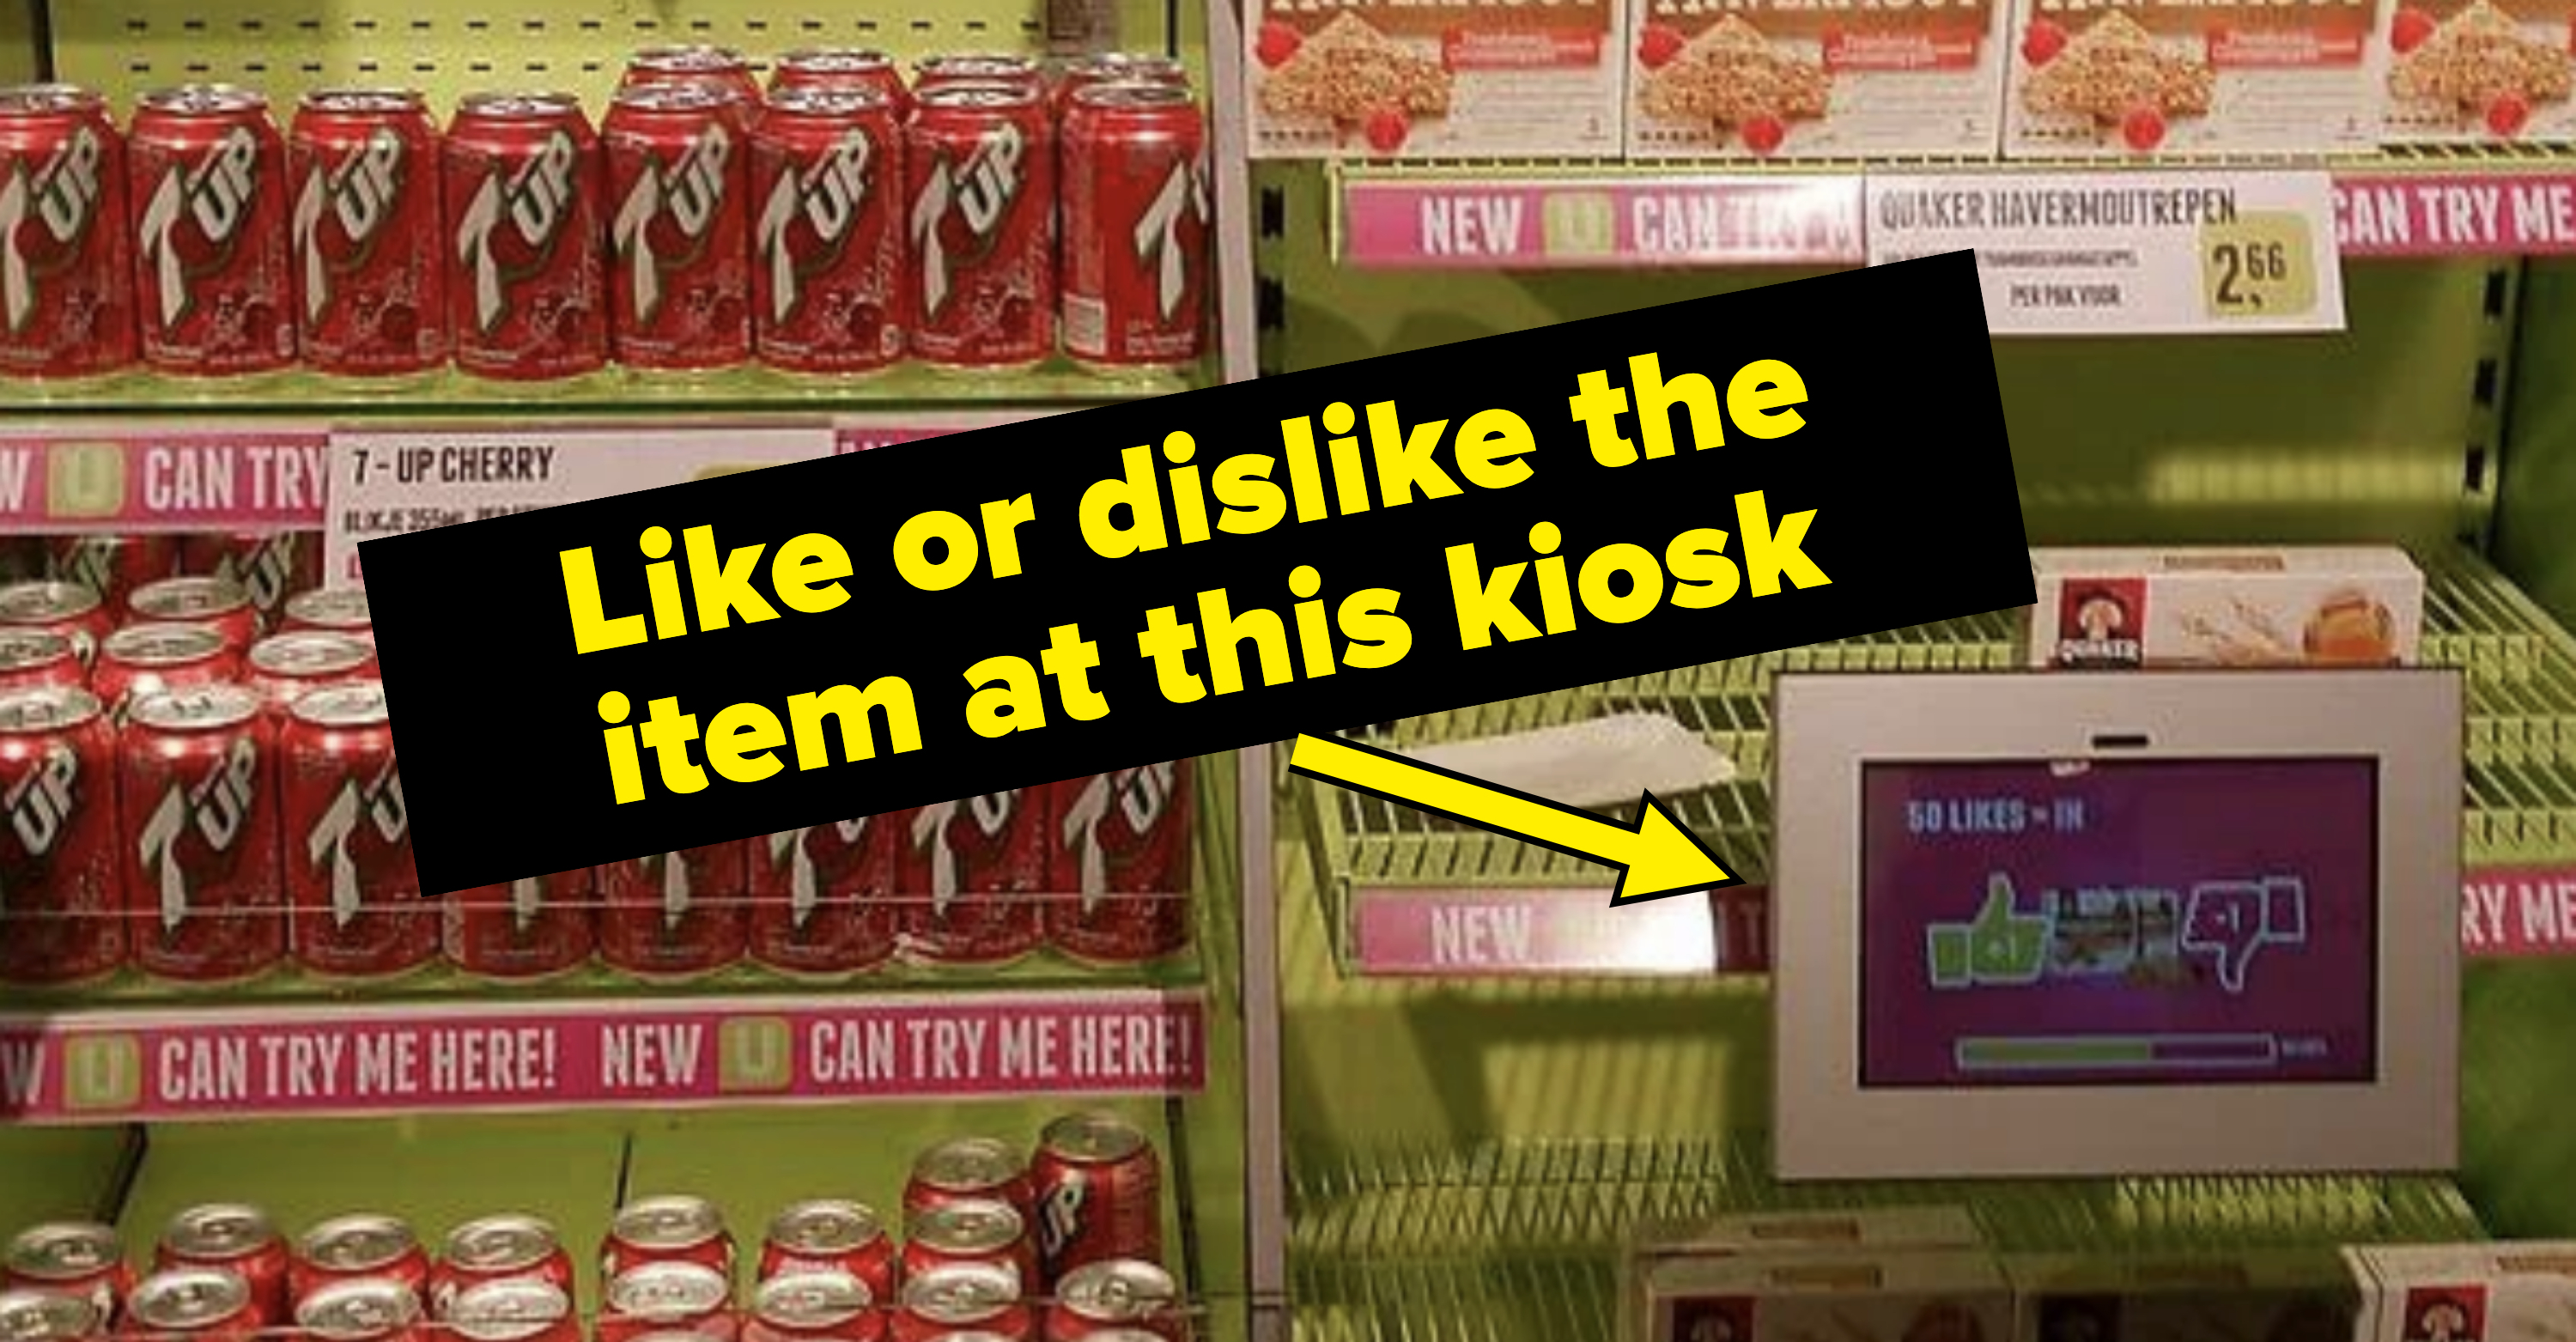 Shelves stocked with 7-UP Cherry cans and promotional display with screen showing social media &#x27;likes&#x27;